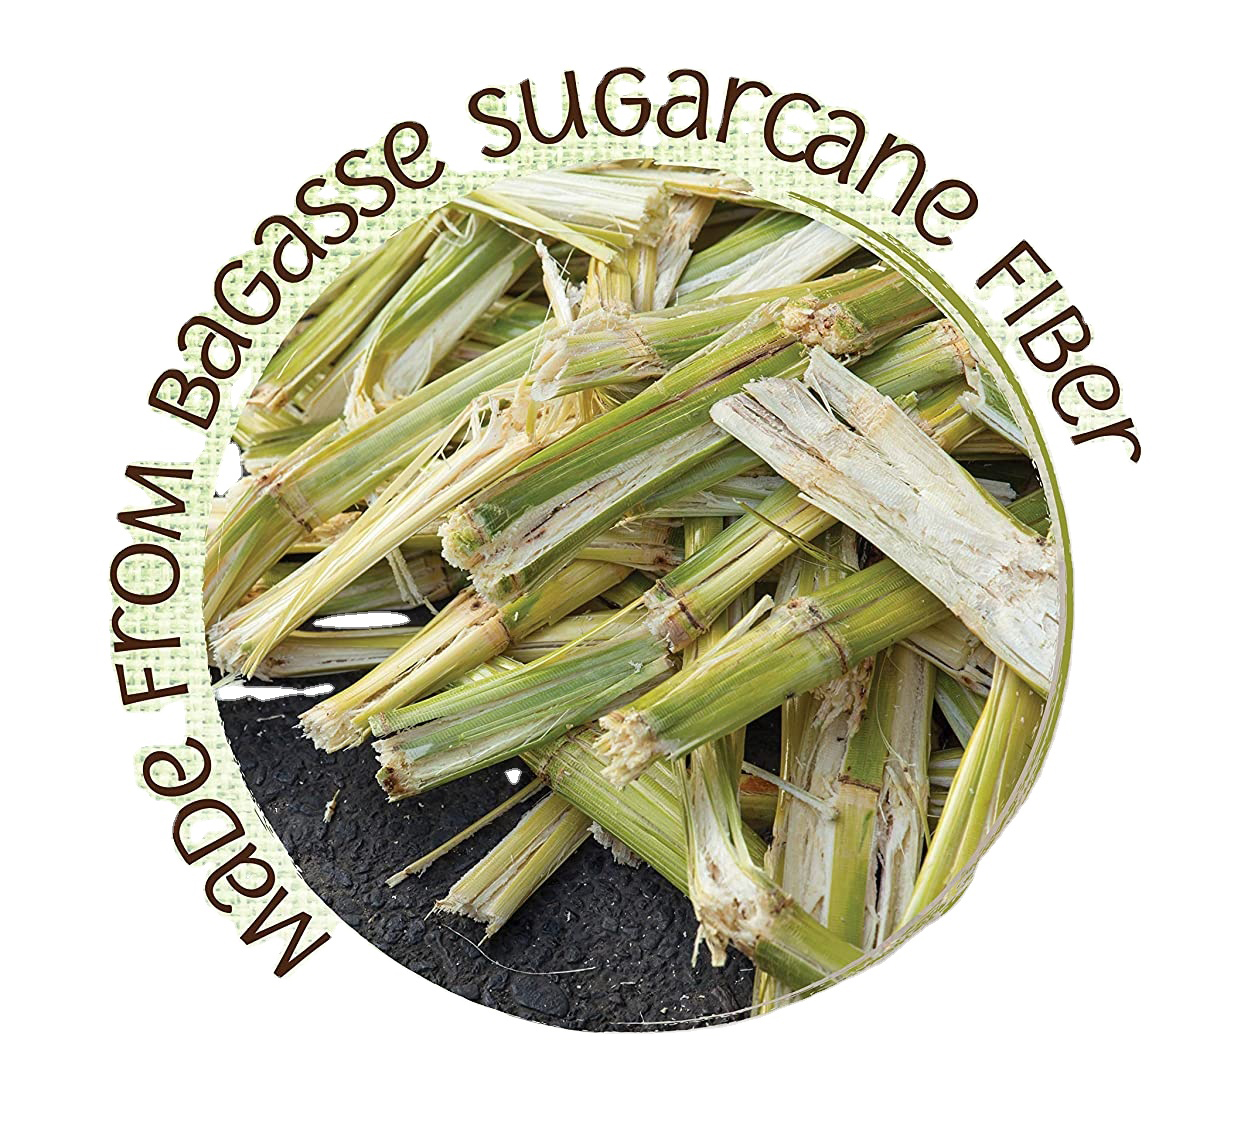 How is bagasse sugarcane developed for use in dinnerware?